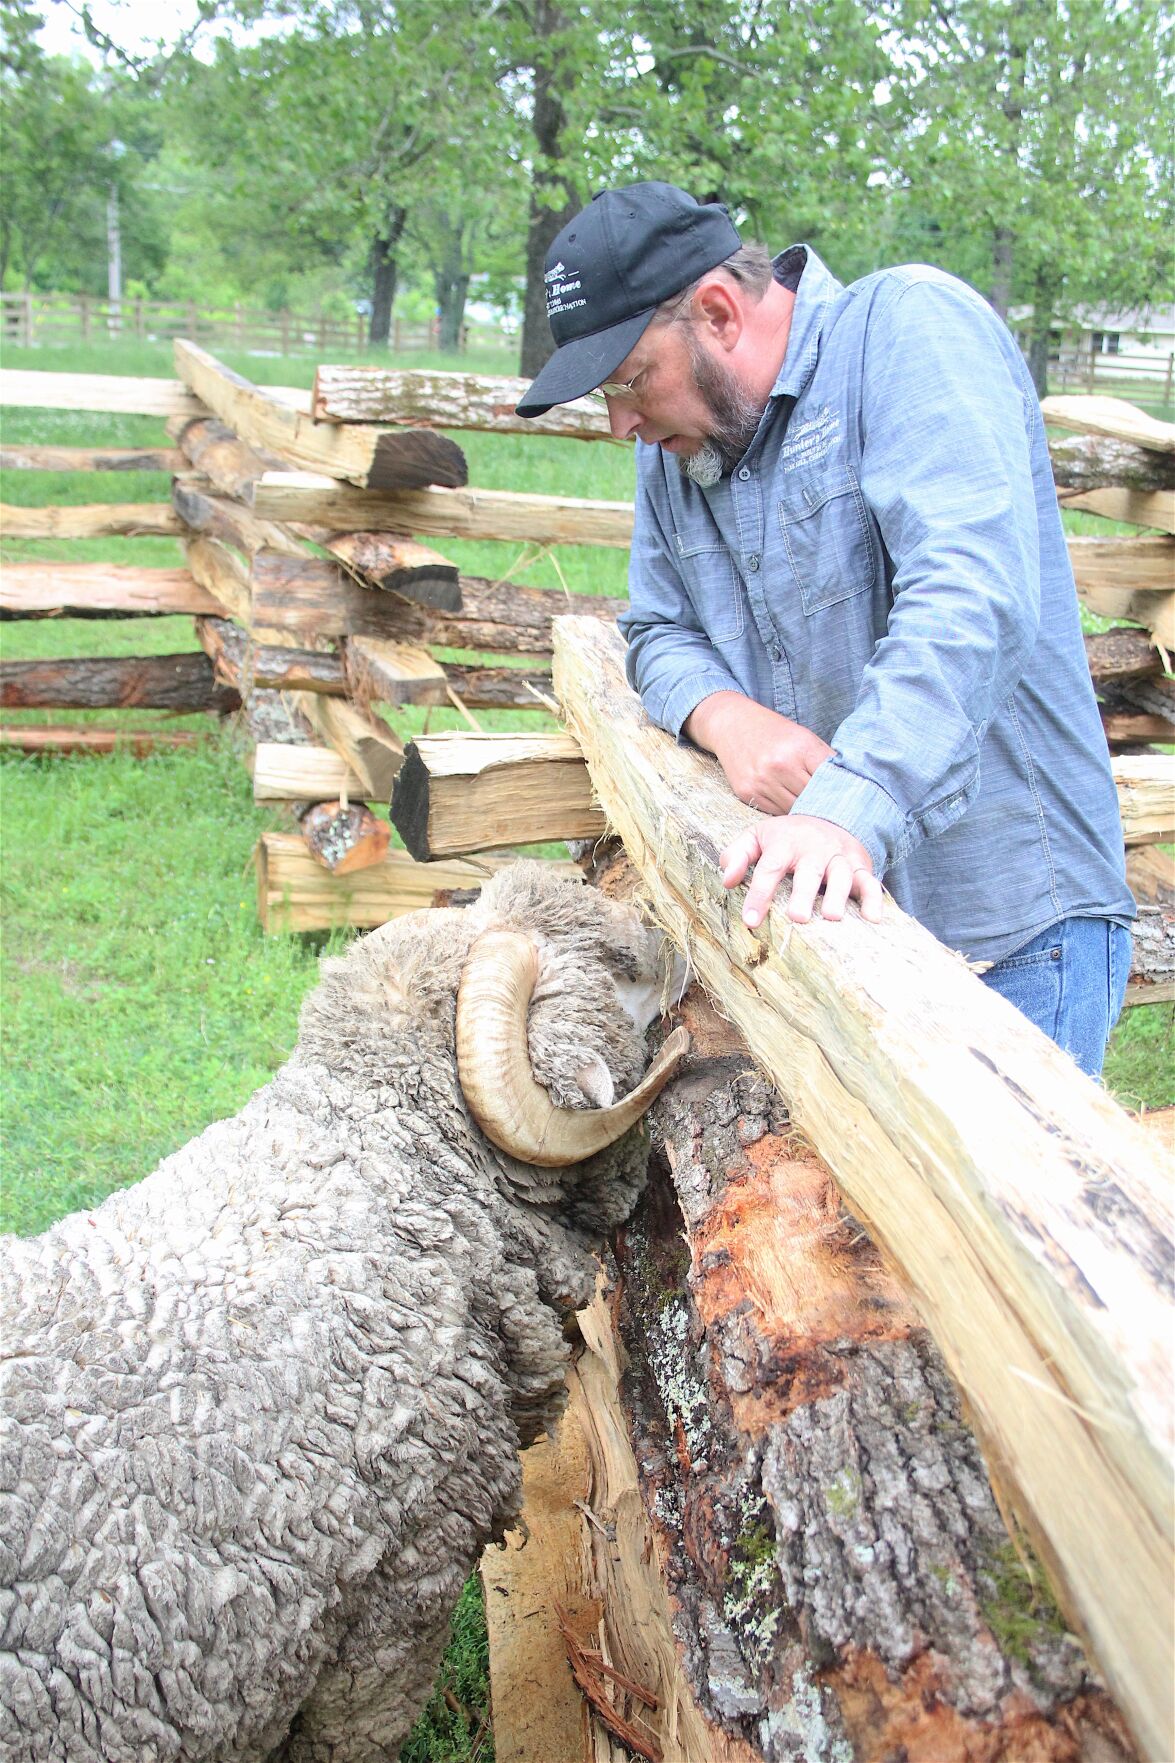 IN SHEEP'S CLOTHING: Harvey the ram will help build up the woolly flock at Hunter's Home